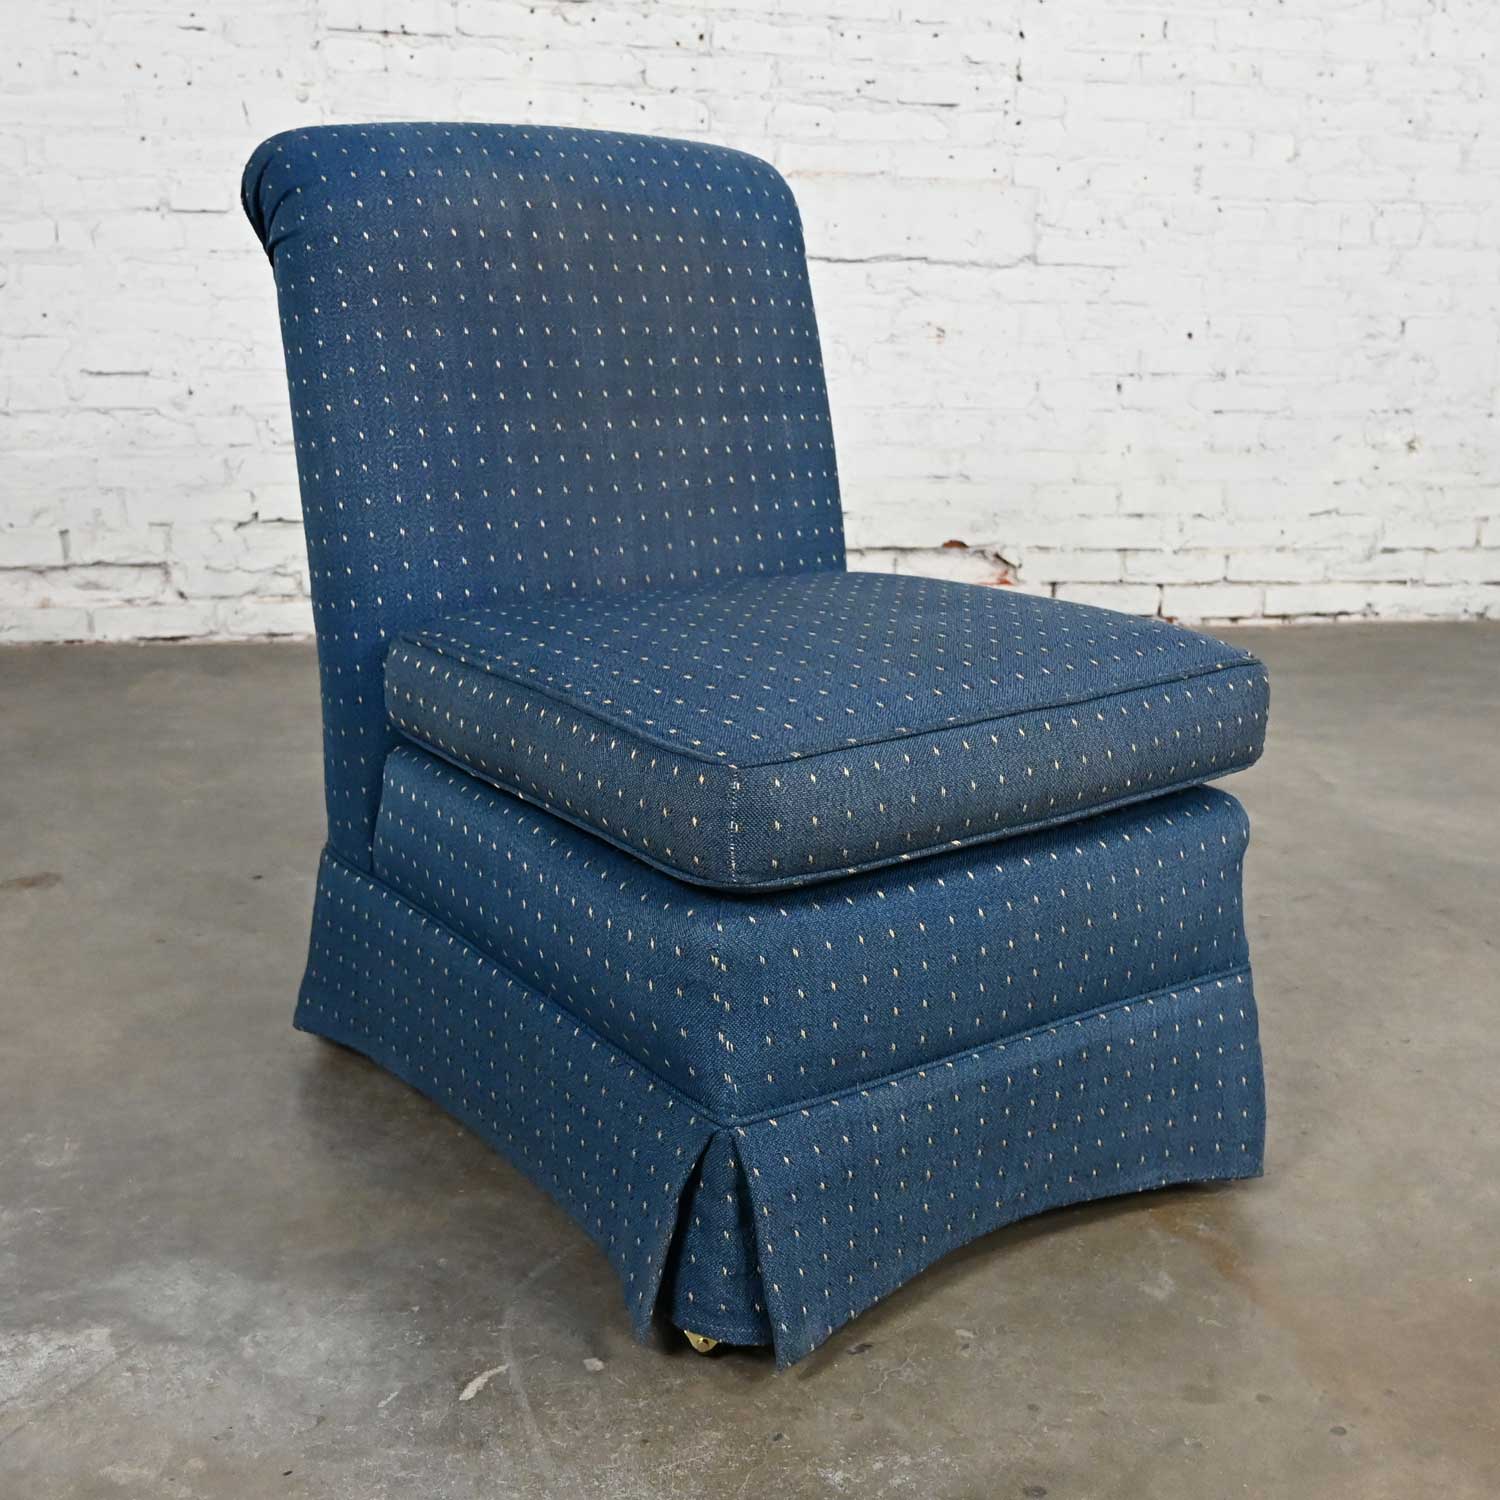 Mid-Late 20th Century Traditional or Hollywood Regency Blue Rolled Back Slipper Chair with Brass Ball Casters